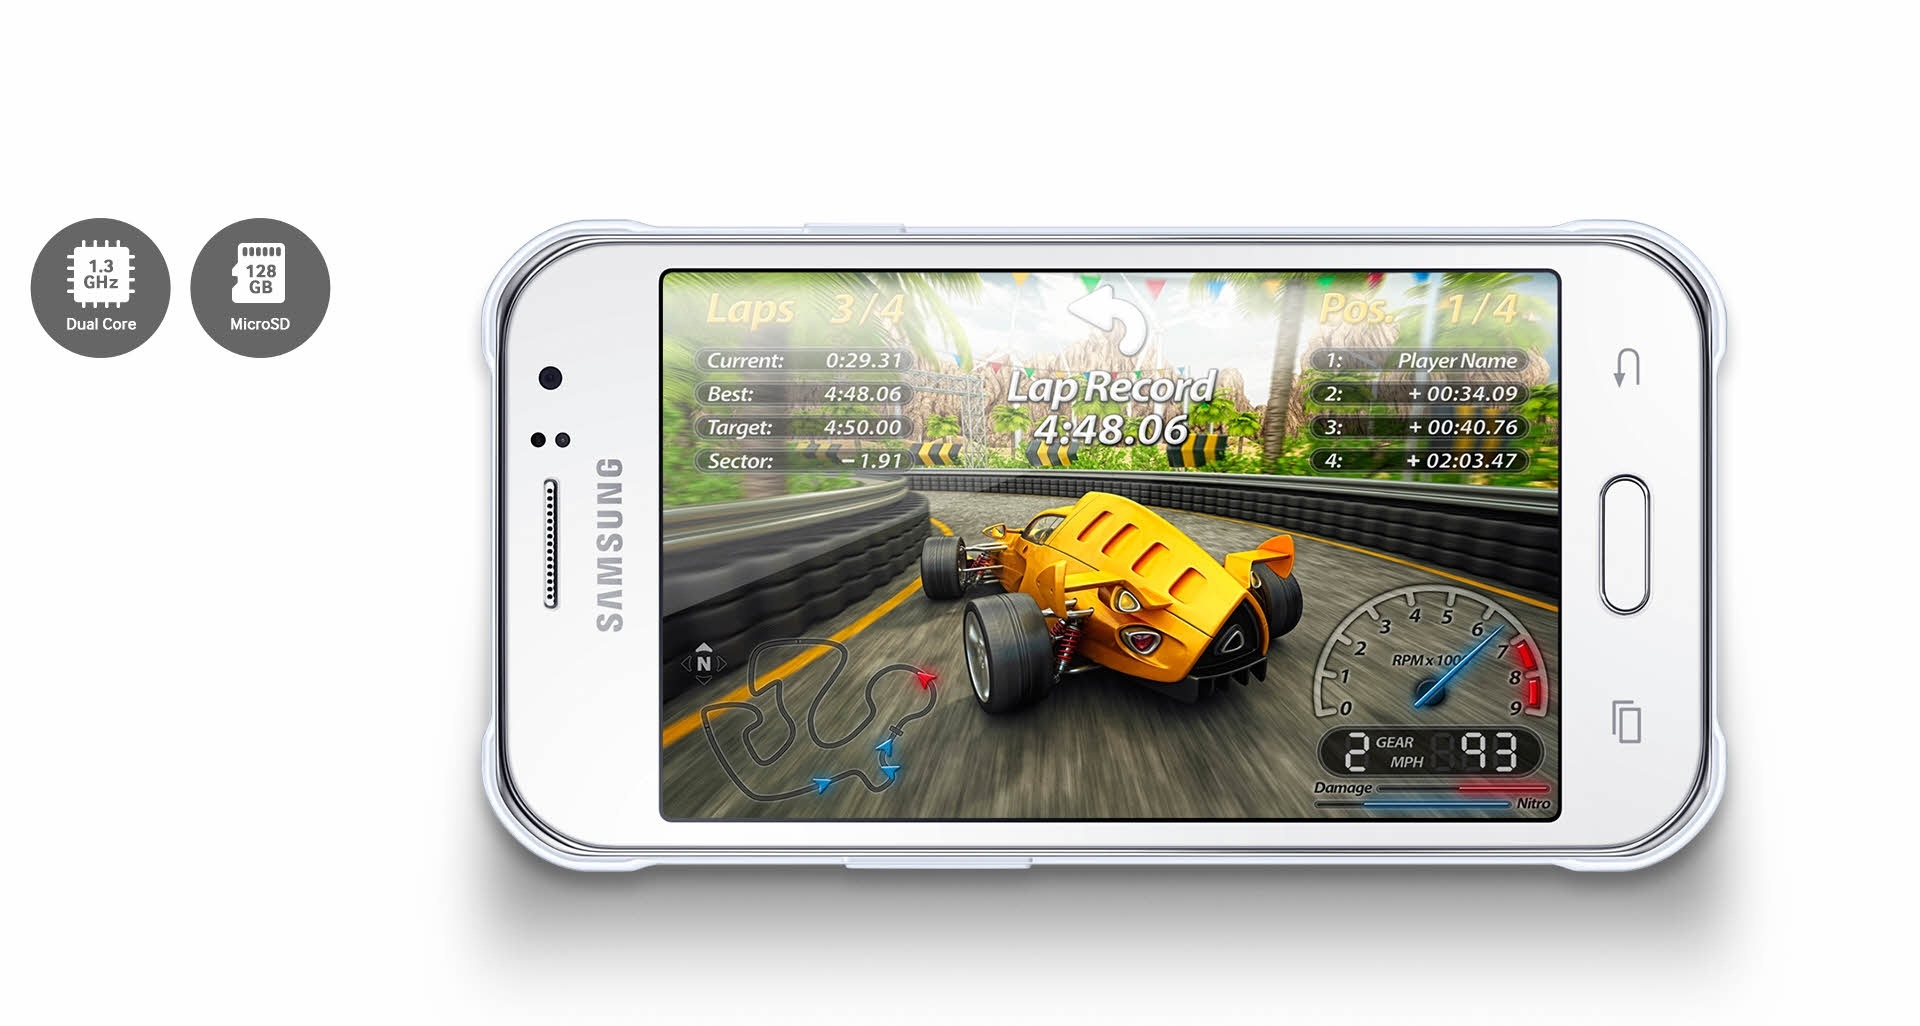 Smartphone with 1.3 GHz Dual core processor